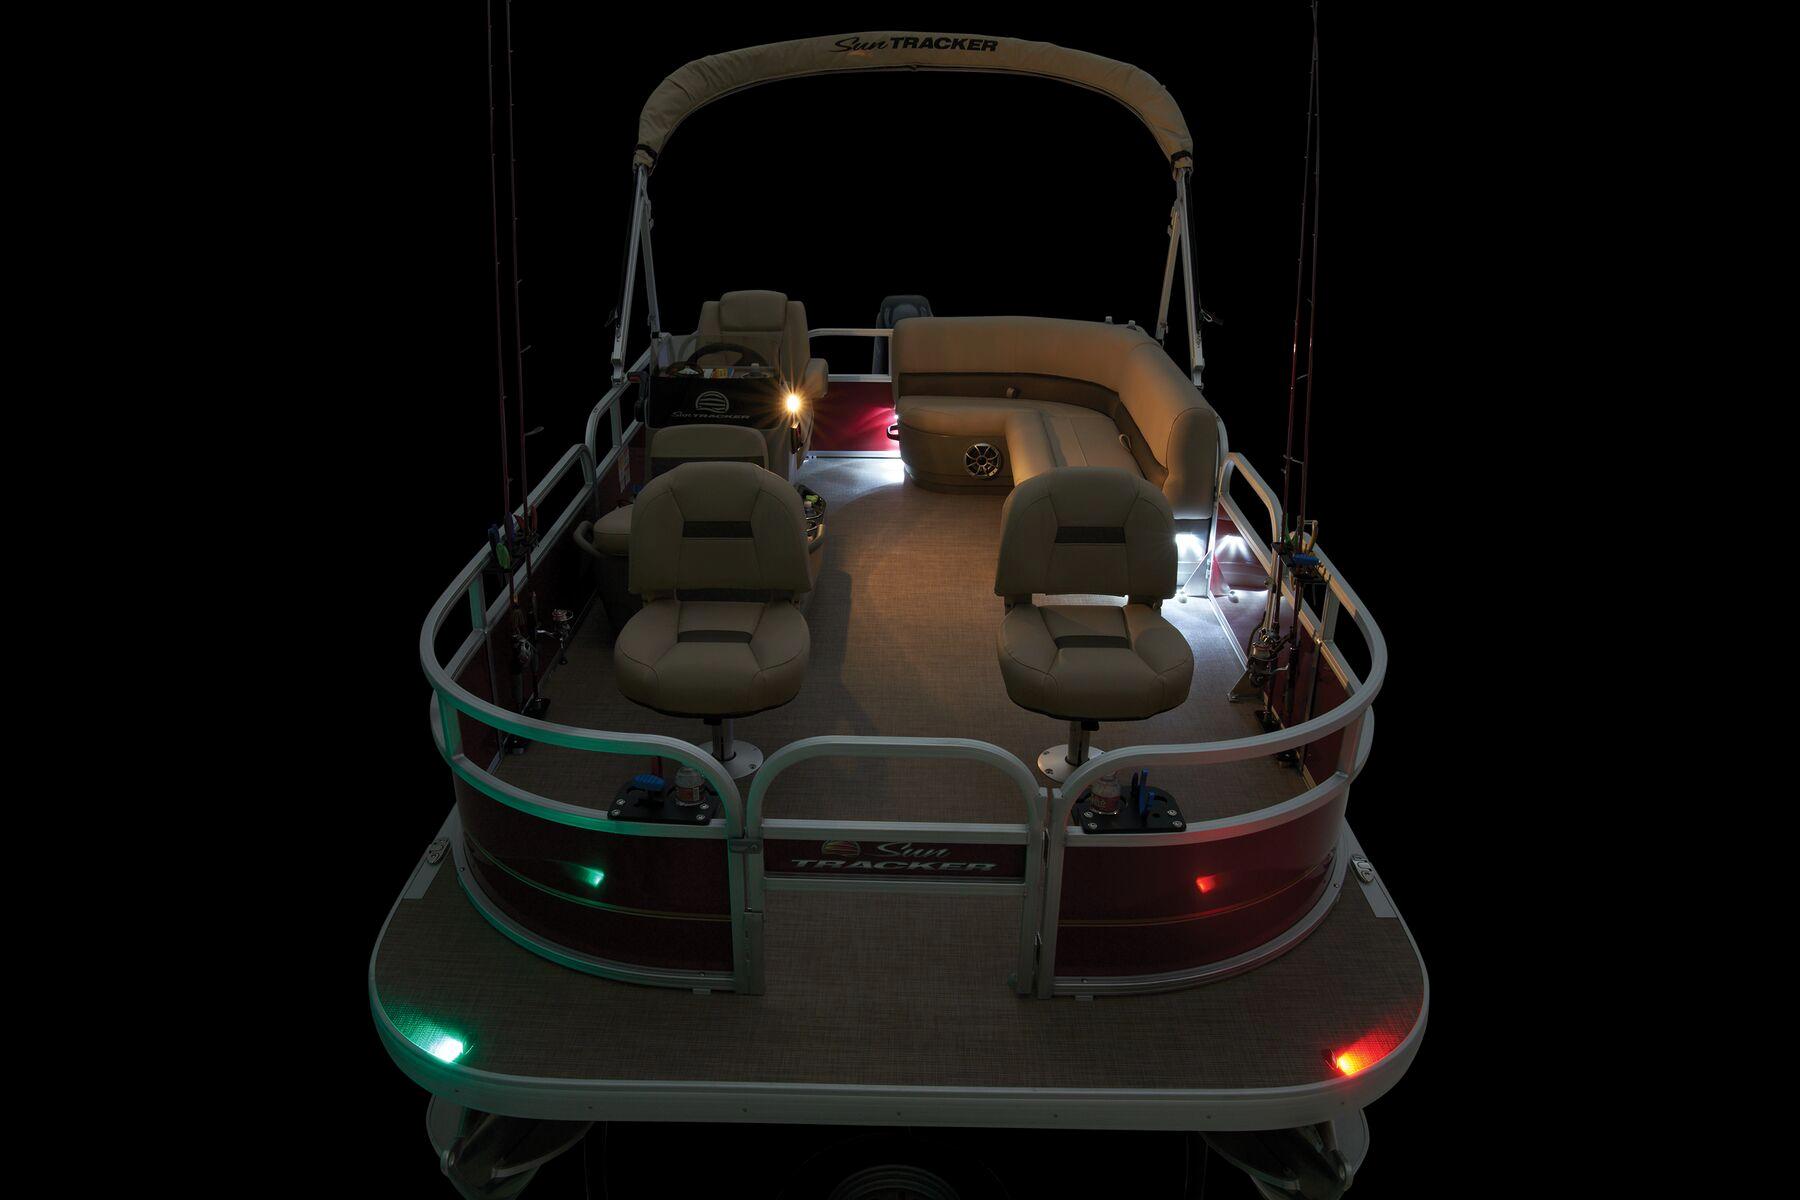 Manufacturer Provided Image: Sun Tracker Bass Buggy 16 XL Select